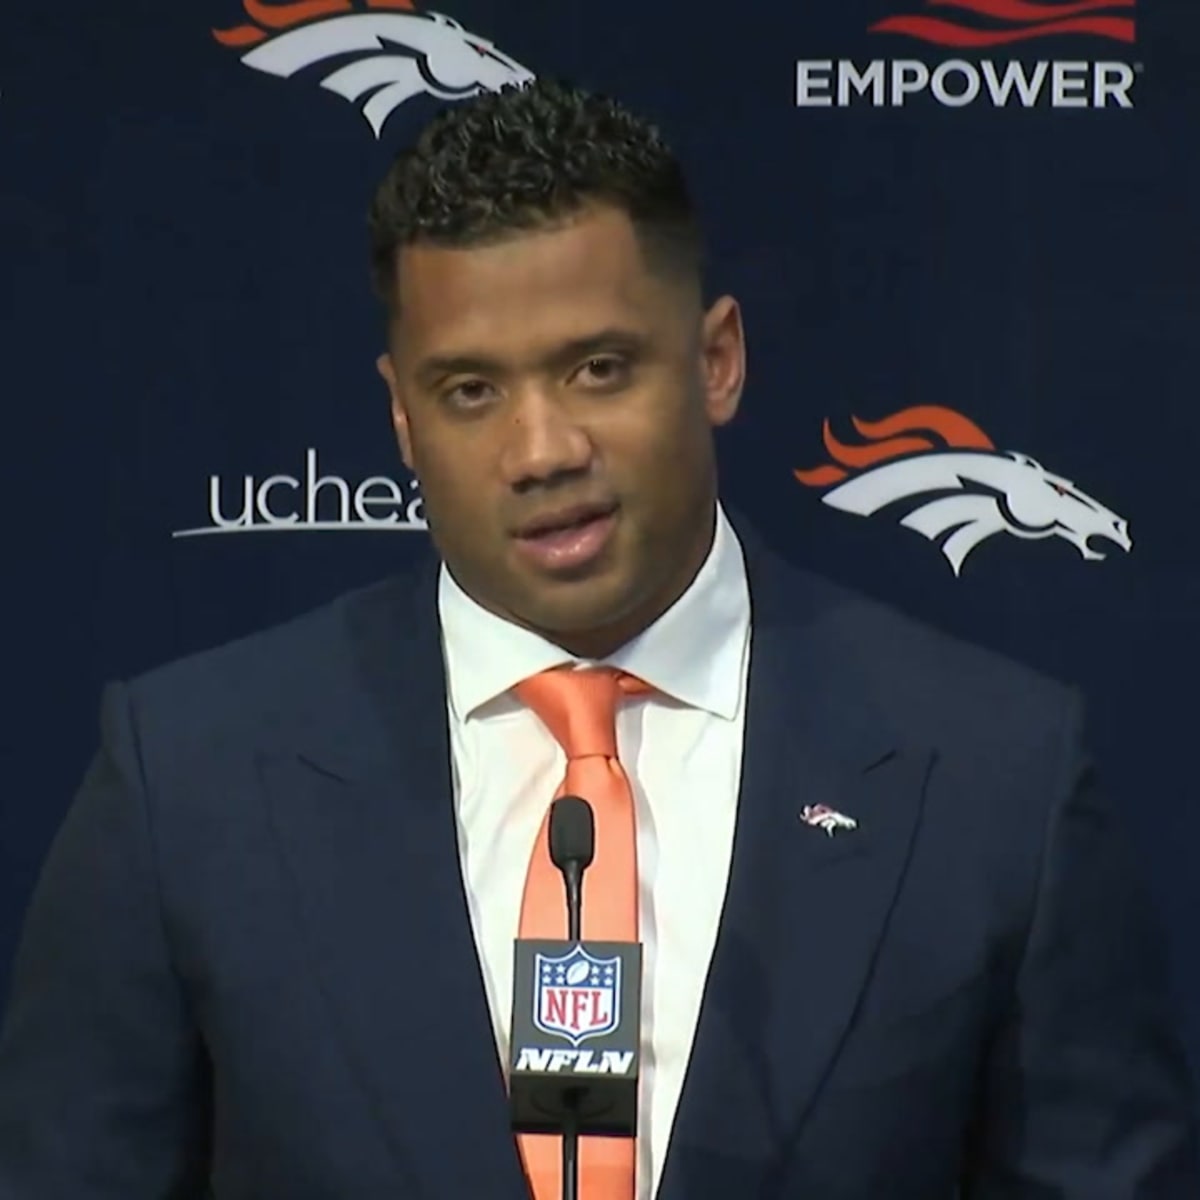 Broncos GM Addresses Russell Wilson Extension Timetable